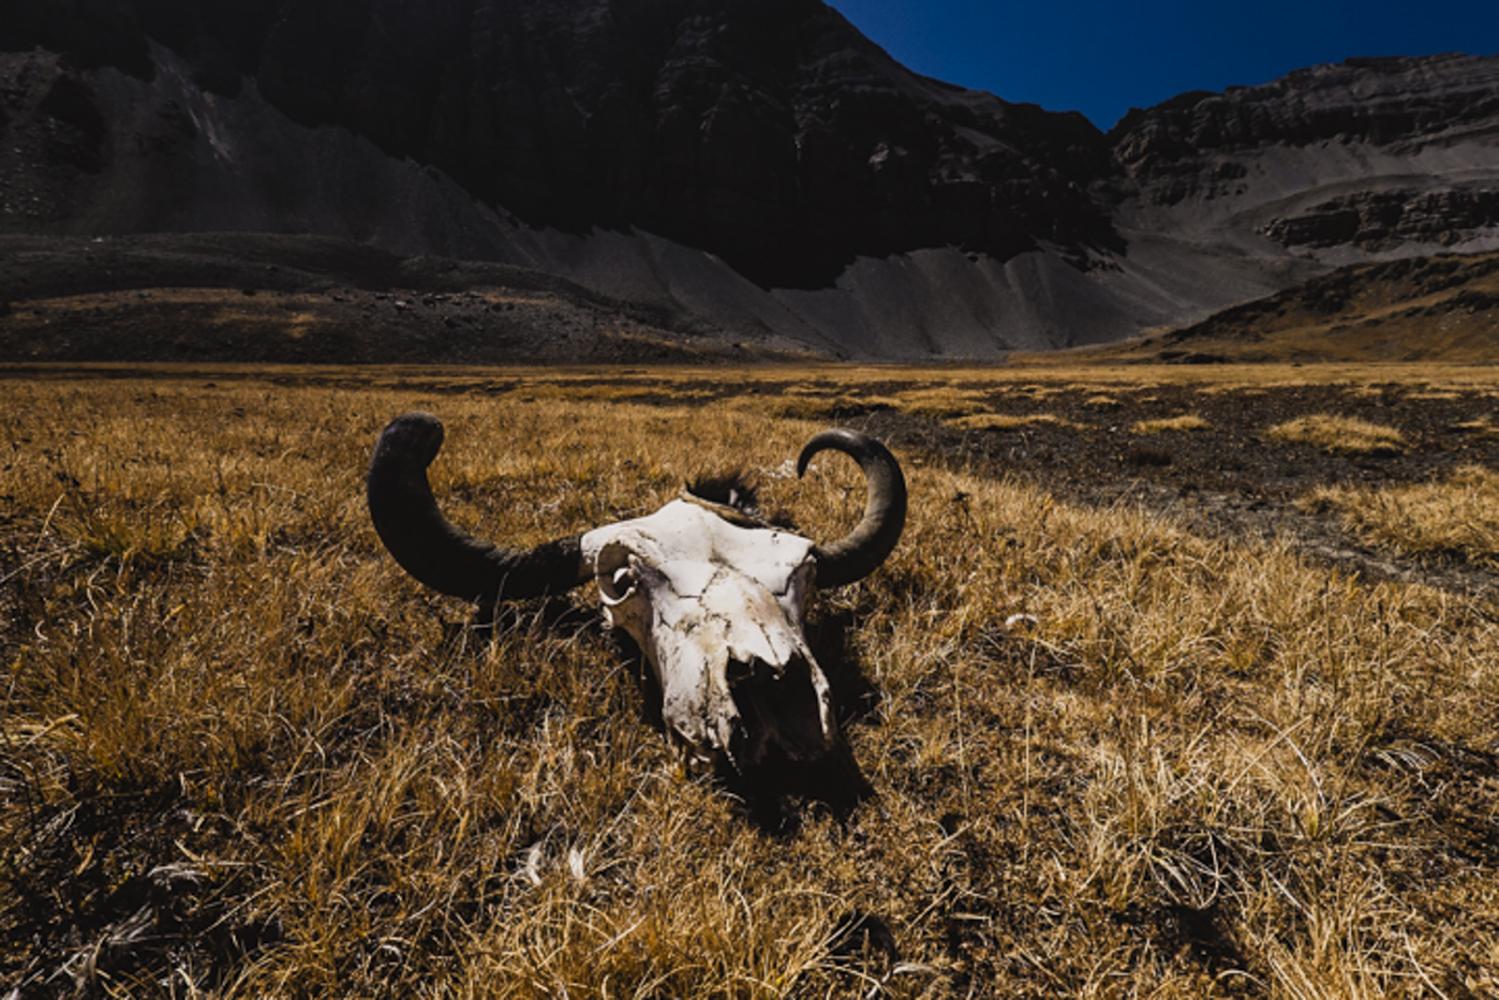 Image from ENVIRONMENT - A yak skull remains in the parched mountains near the...